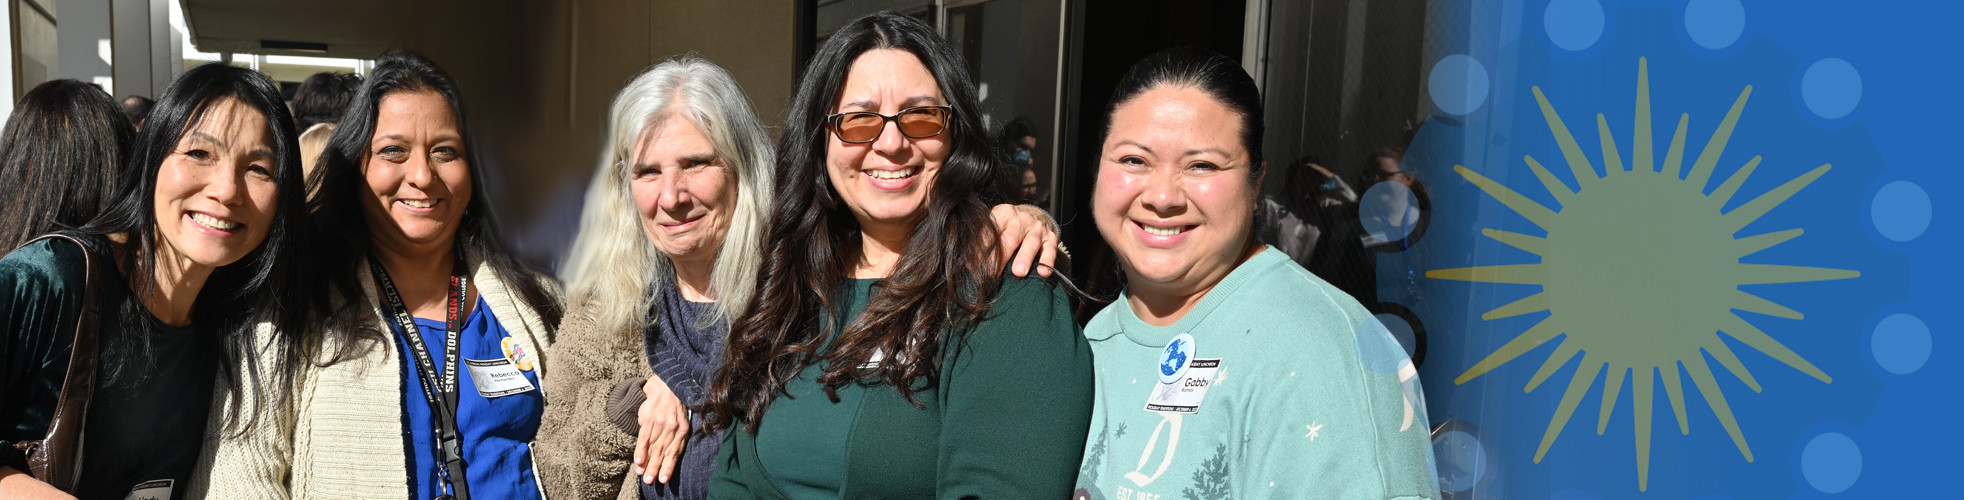 group smiles at Holiday Lunch event